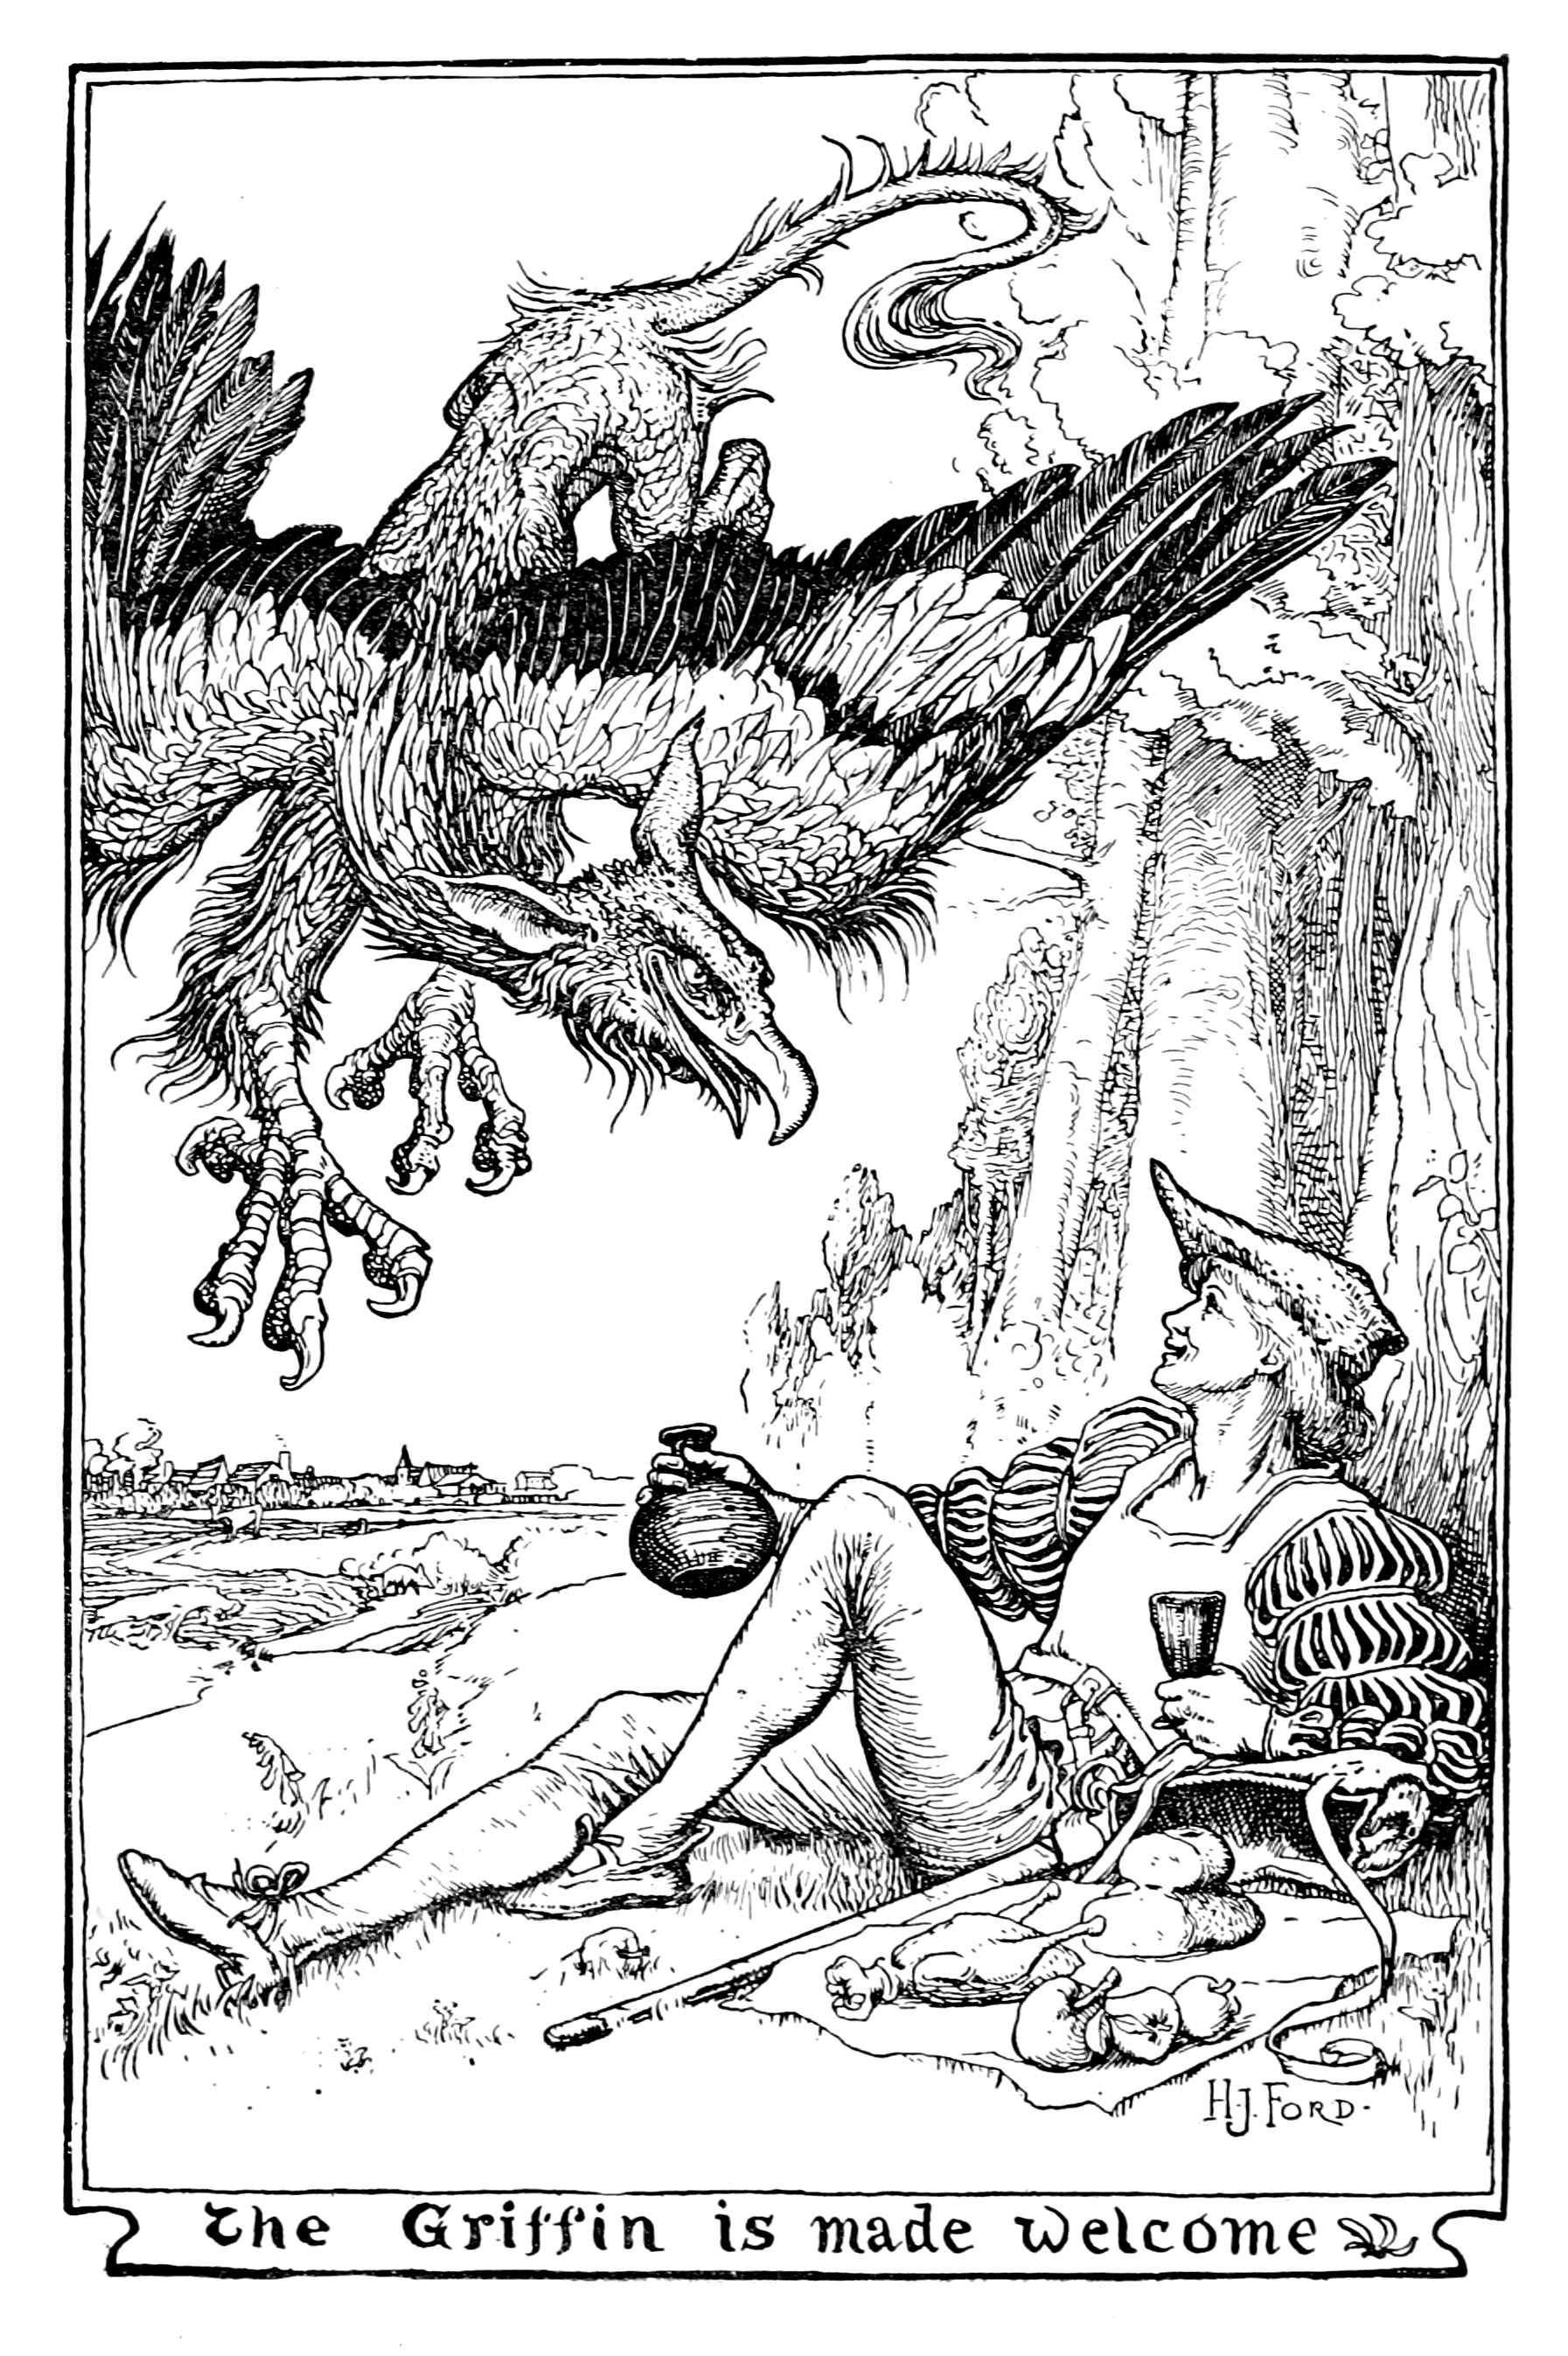 Henry Justice Ford - The pink fairy book, edited by Andrew Lang, 1897 (illustration 11)